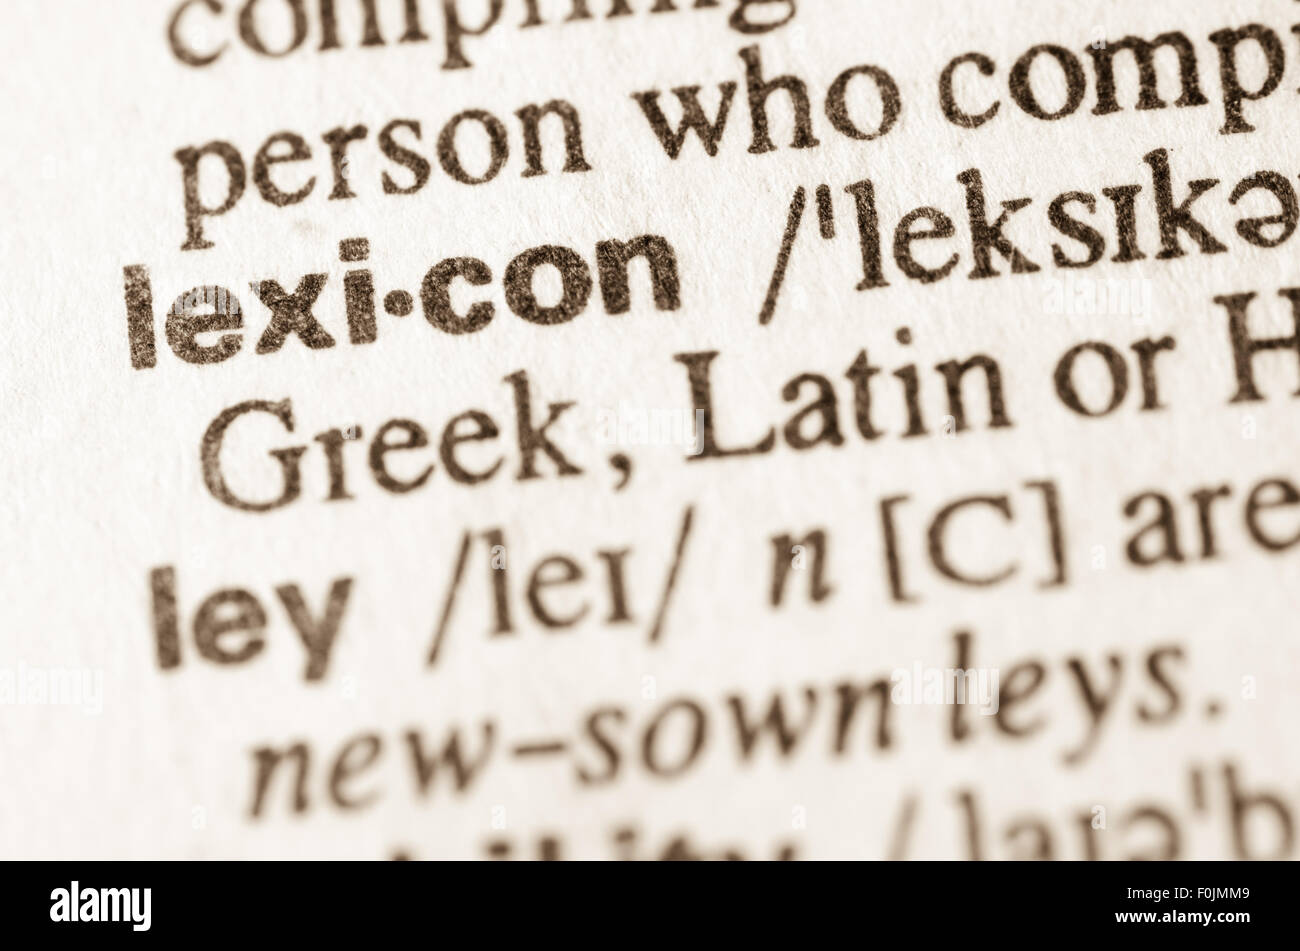 Definition of word lexicon in dictionary Stock Photo